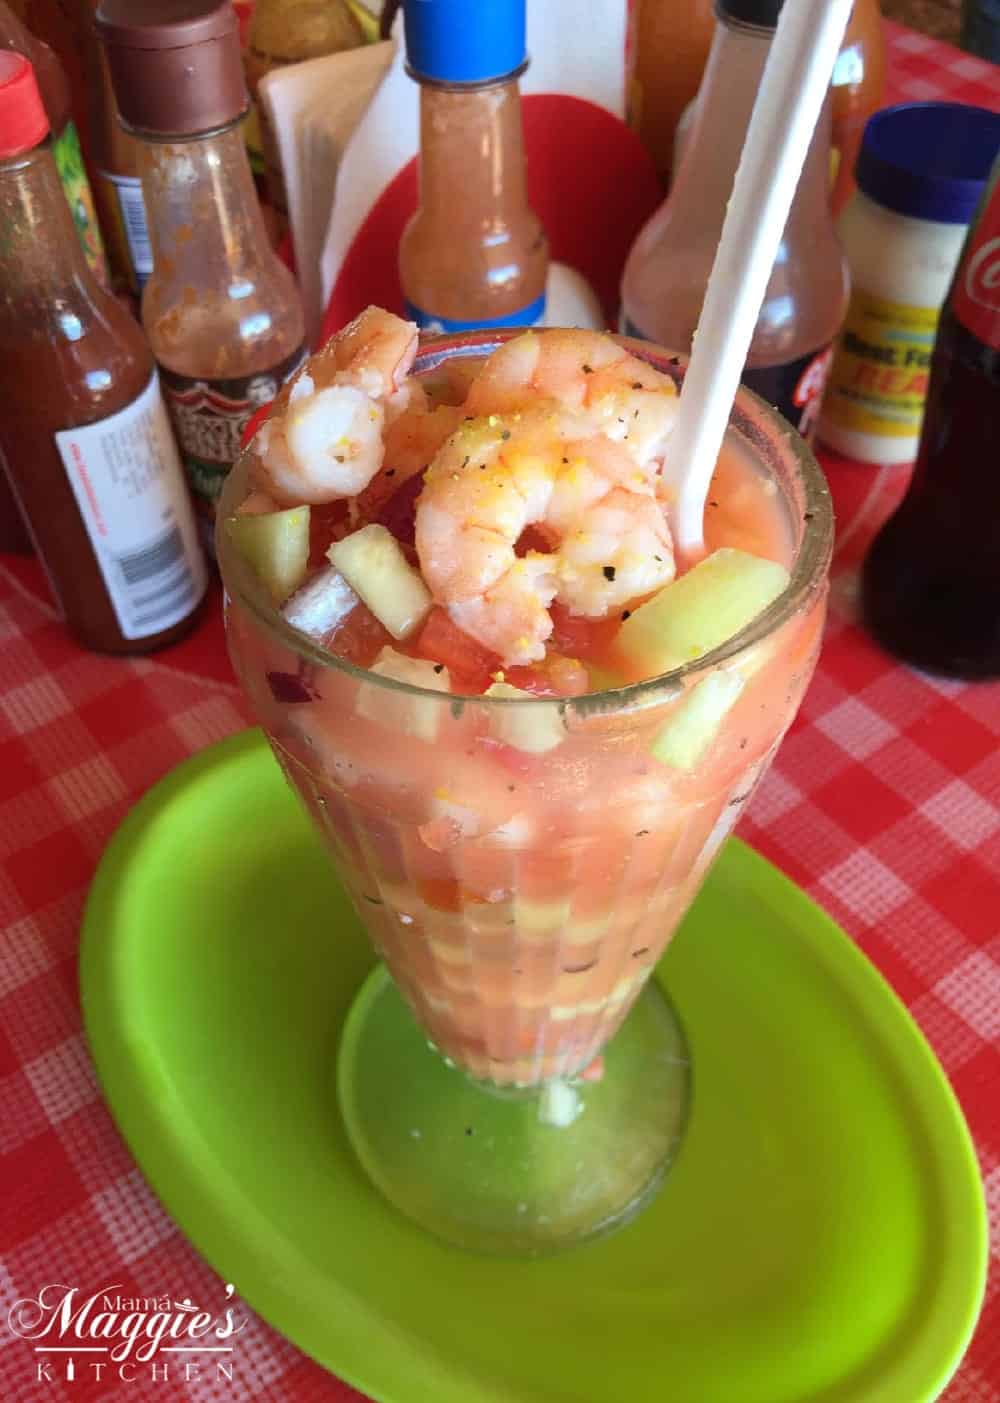 Coctel de Camarones (Mexican Shrimp Cocktail) in a glass on a green plate and red checkered tablecloth.